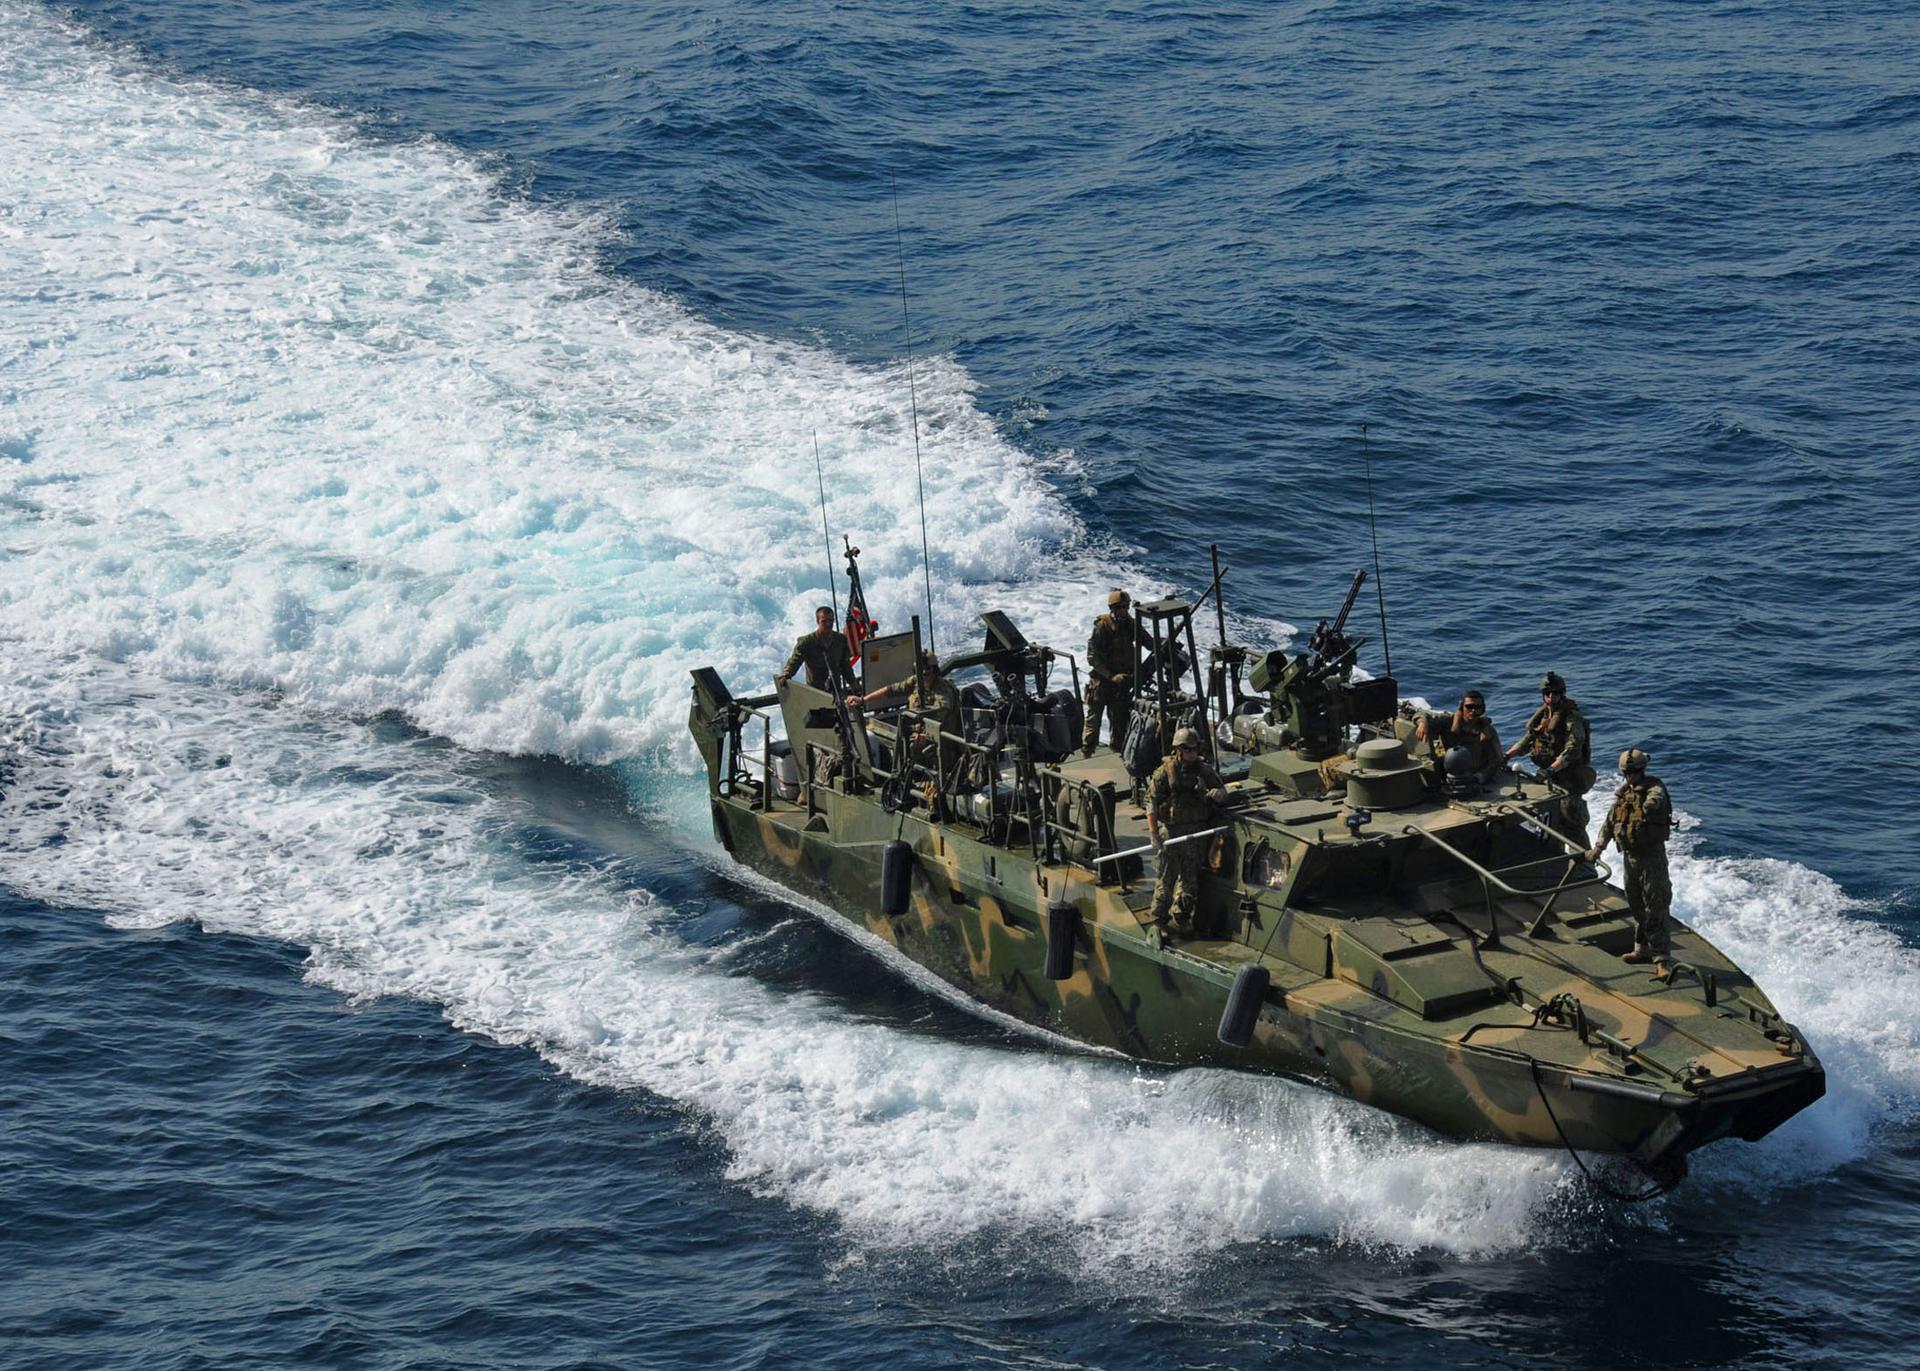 A riverine command boat from Riverine Detachment 23 operates during a maritime air support operations center exercise in the Persian Gulf in this June 12, 2012 handout photo, provided by the U.S. Navy, January 12, 2016.